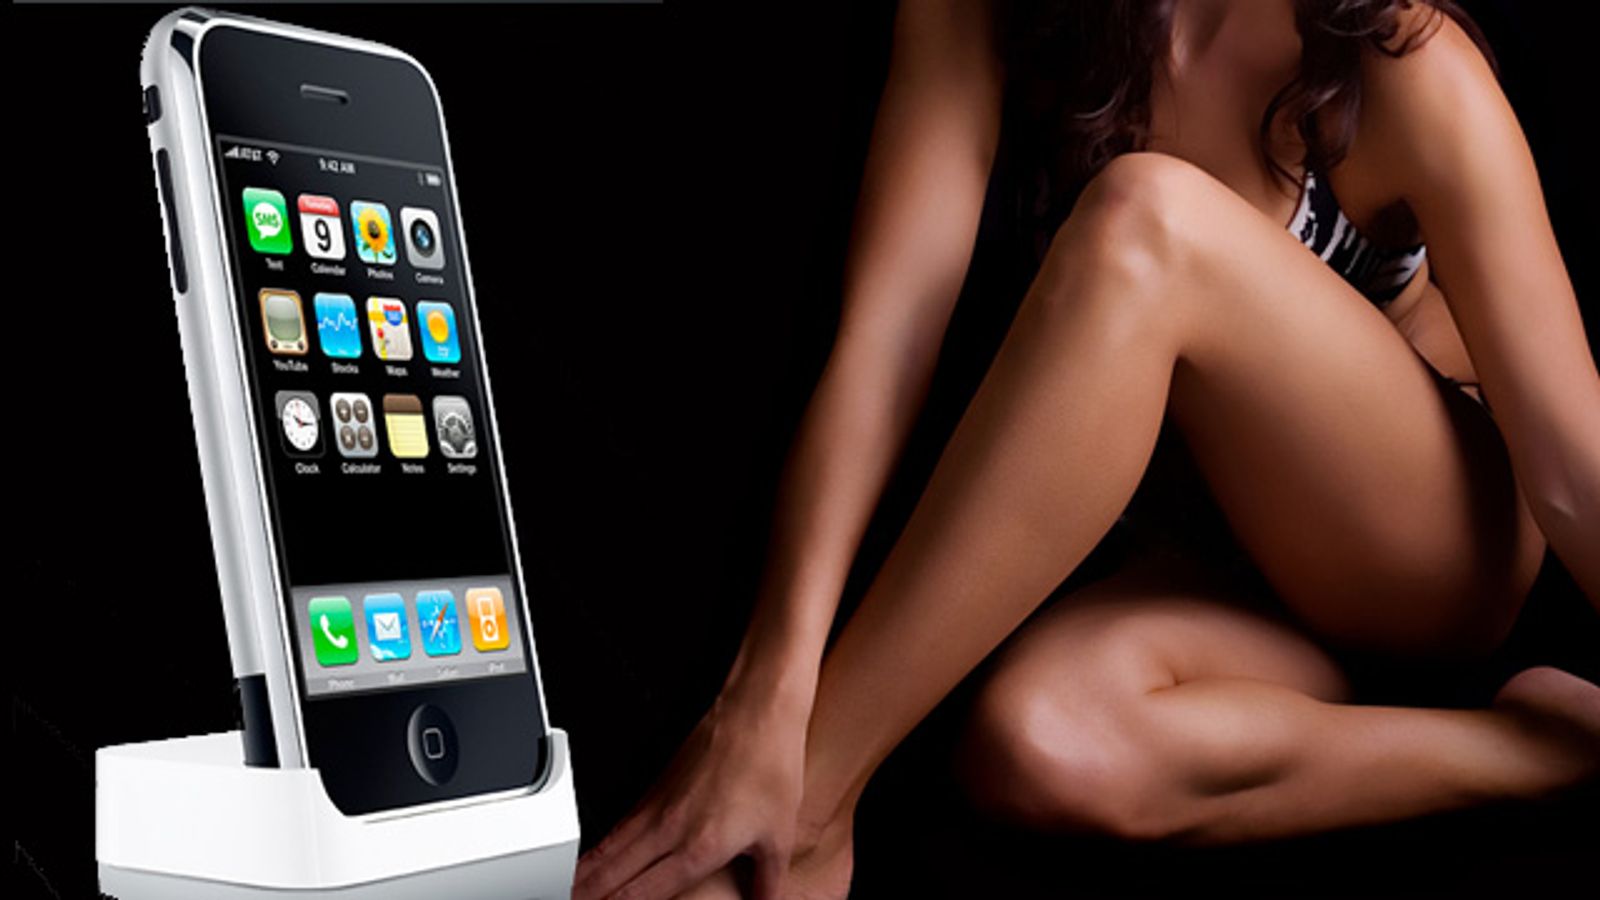 OK Cupid: iPhone Users Have More Sexual Partners